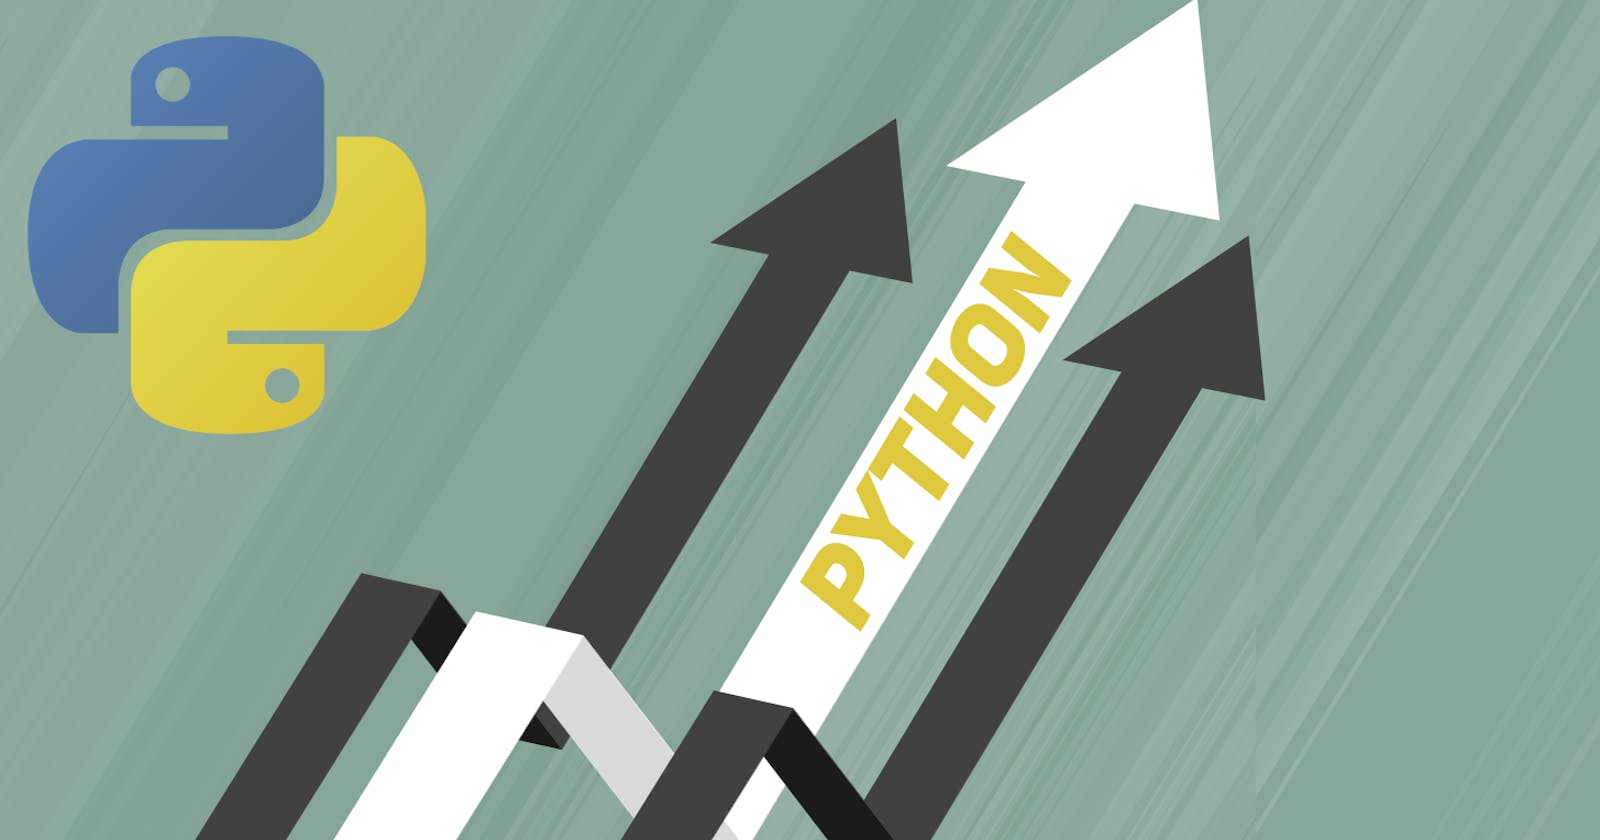 Building efficient crypto trading software with Python